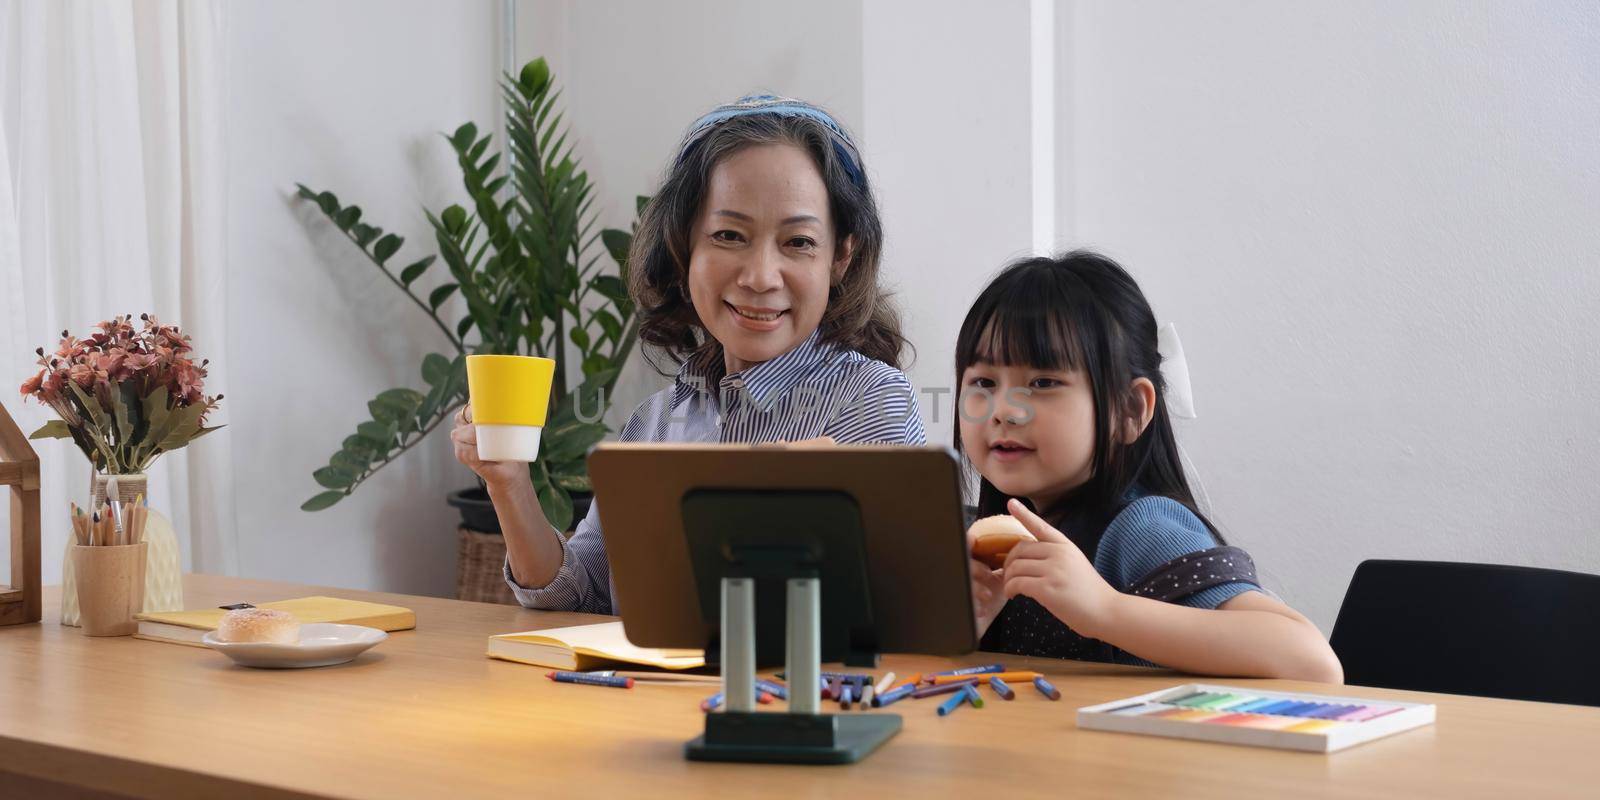 Asian grandmother and granddaughter happily pencil drawing at home.